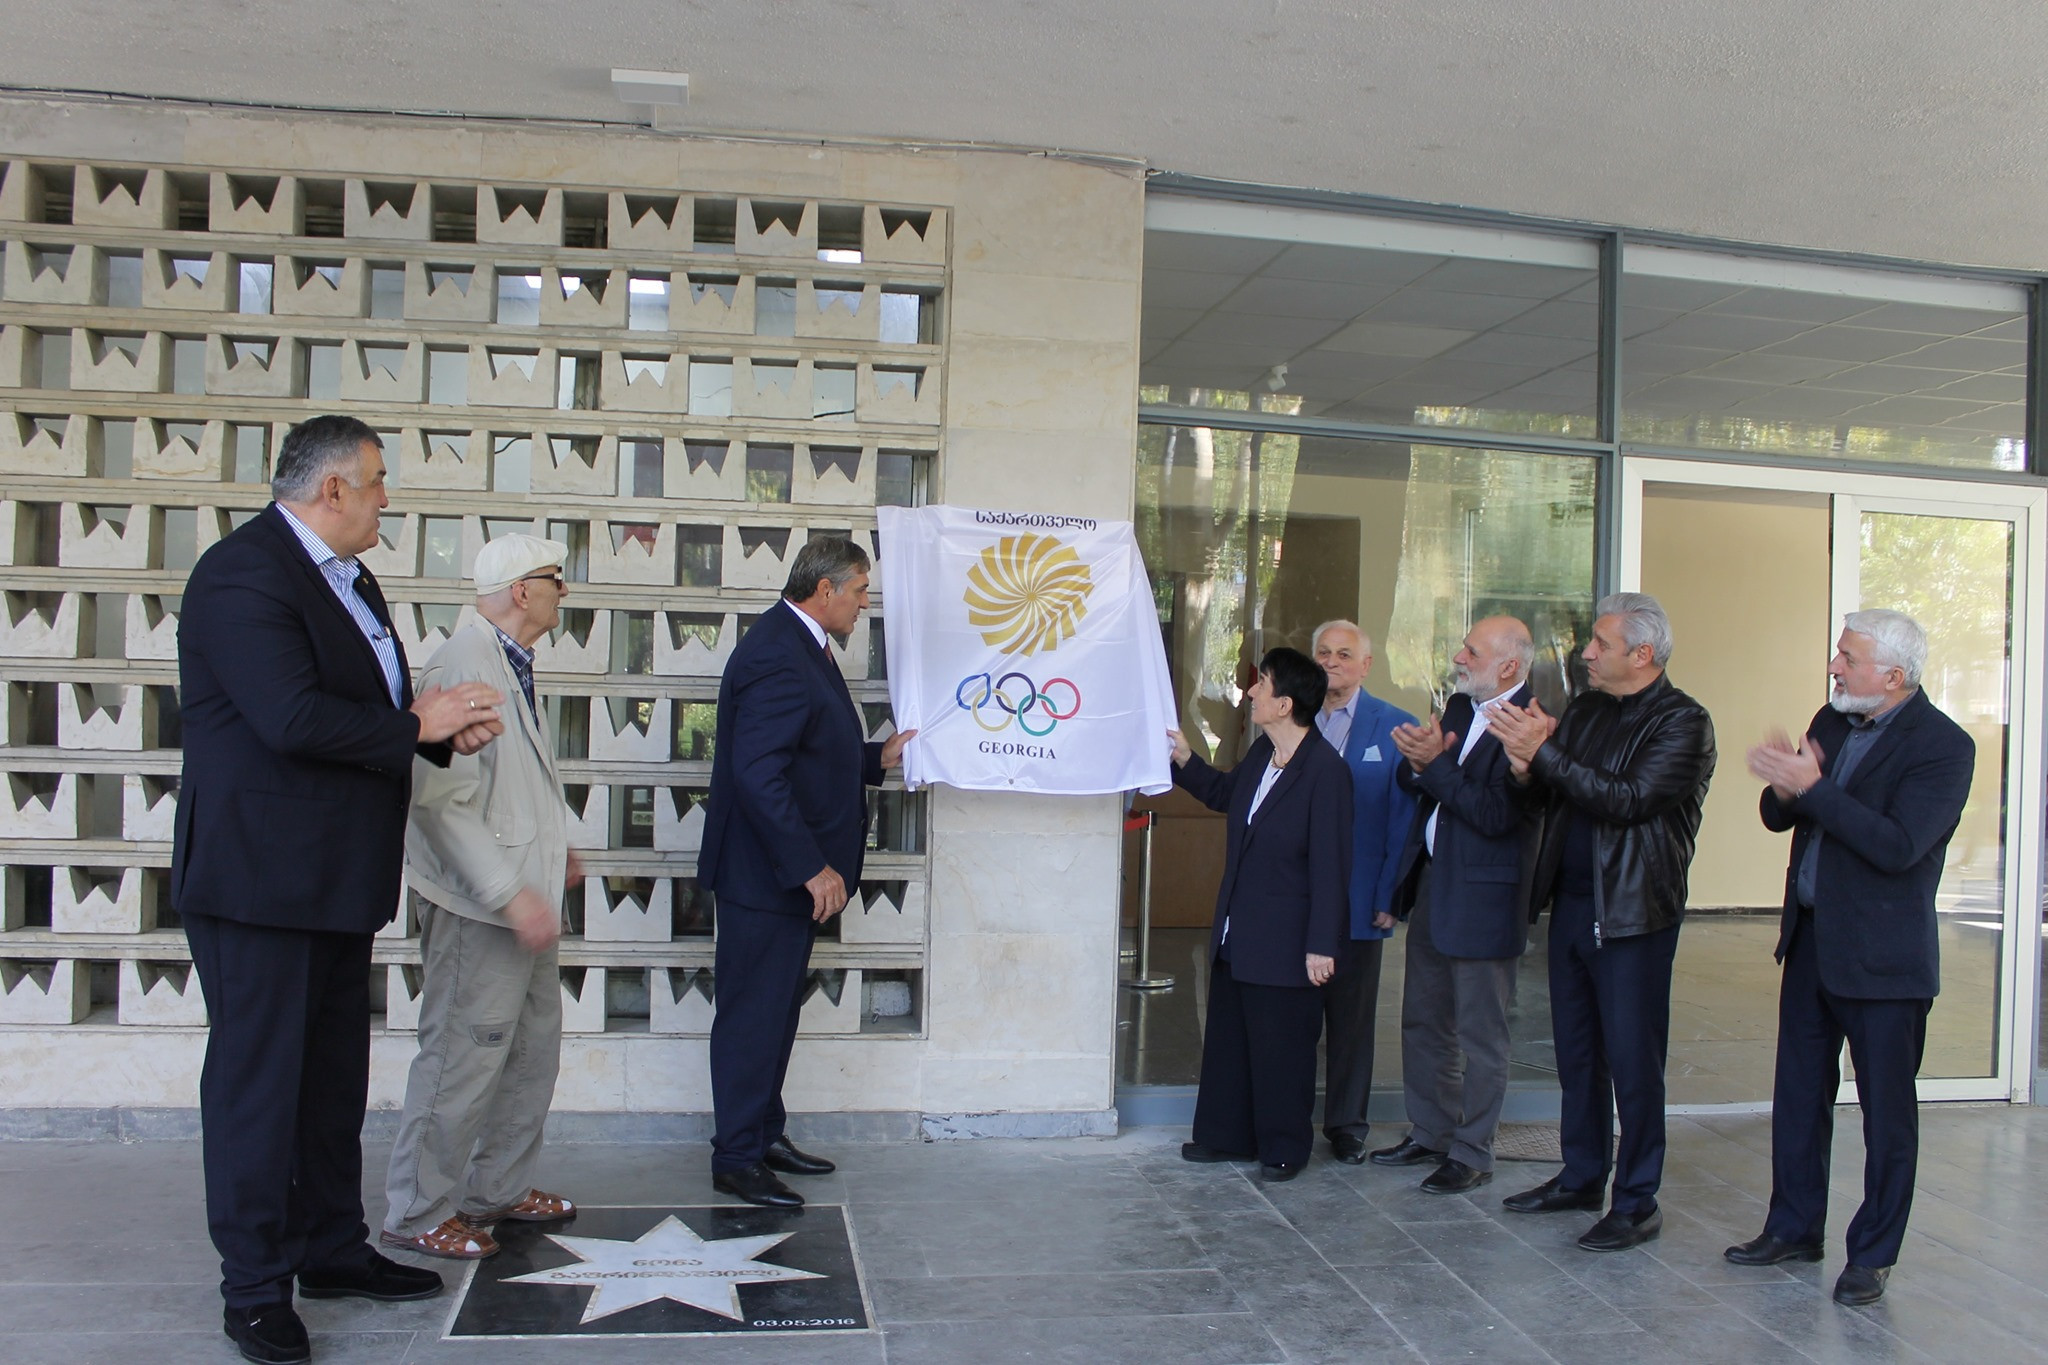 A memorial plague was revealed in celebration of the Georgian National Olympic Committee's 30th anniversary ©GNOC